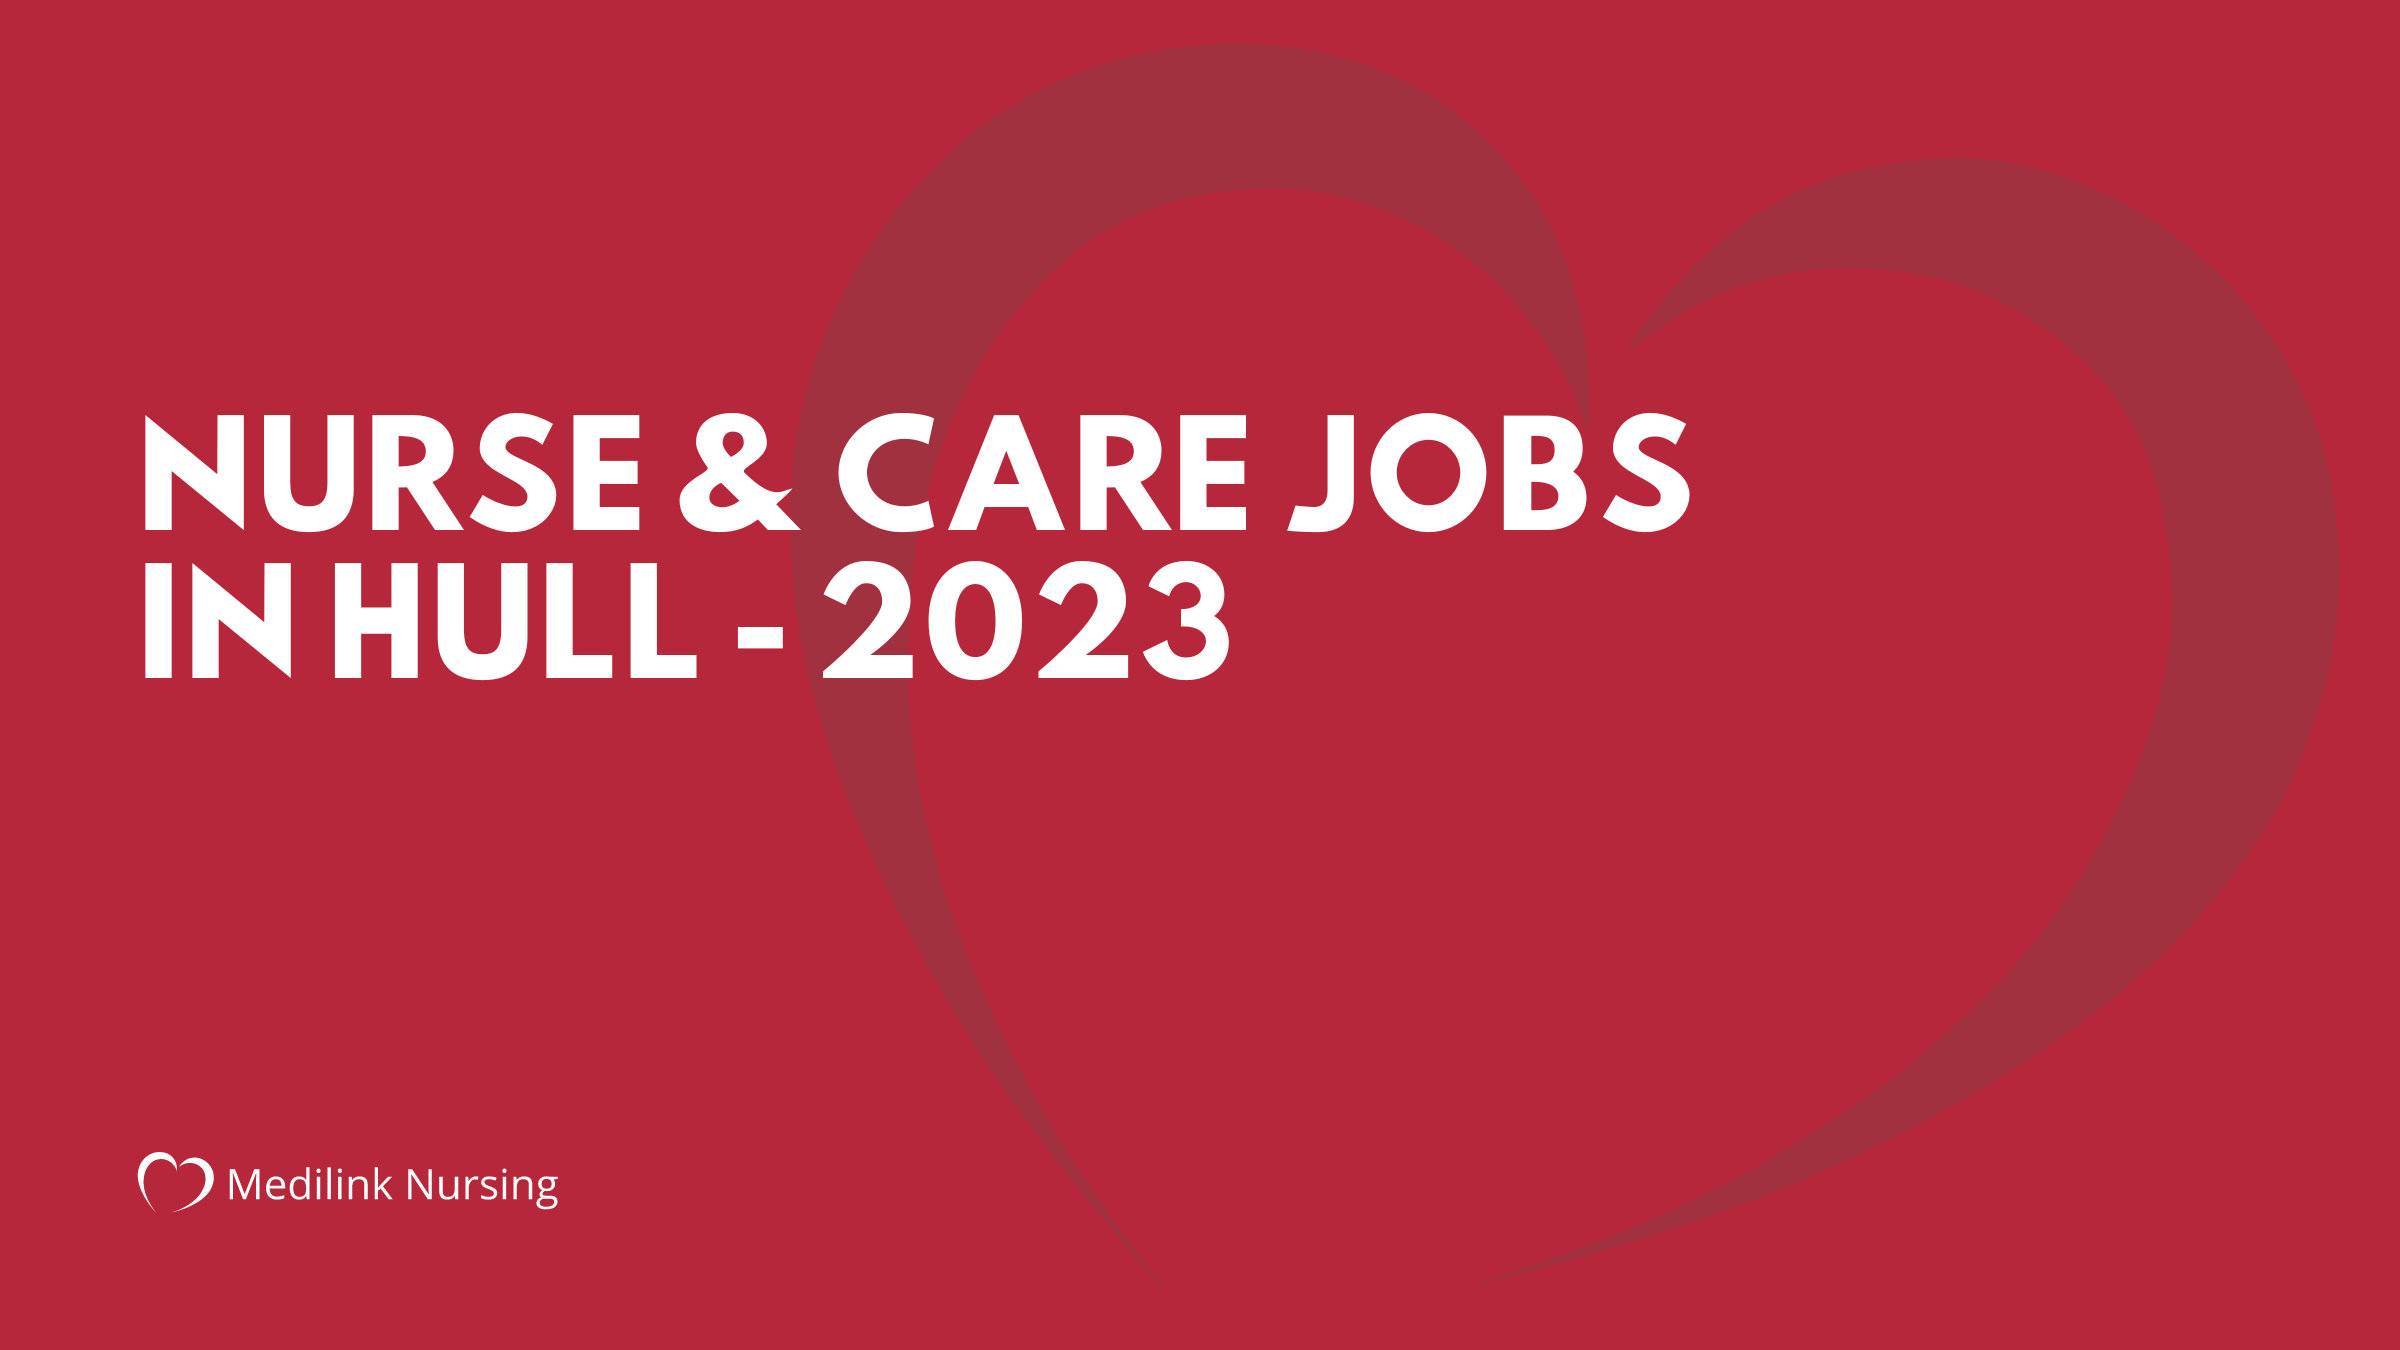 Care Jobs in Hull With Medilink Nursing! 2023